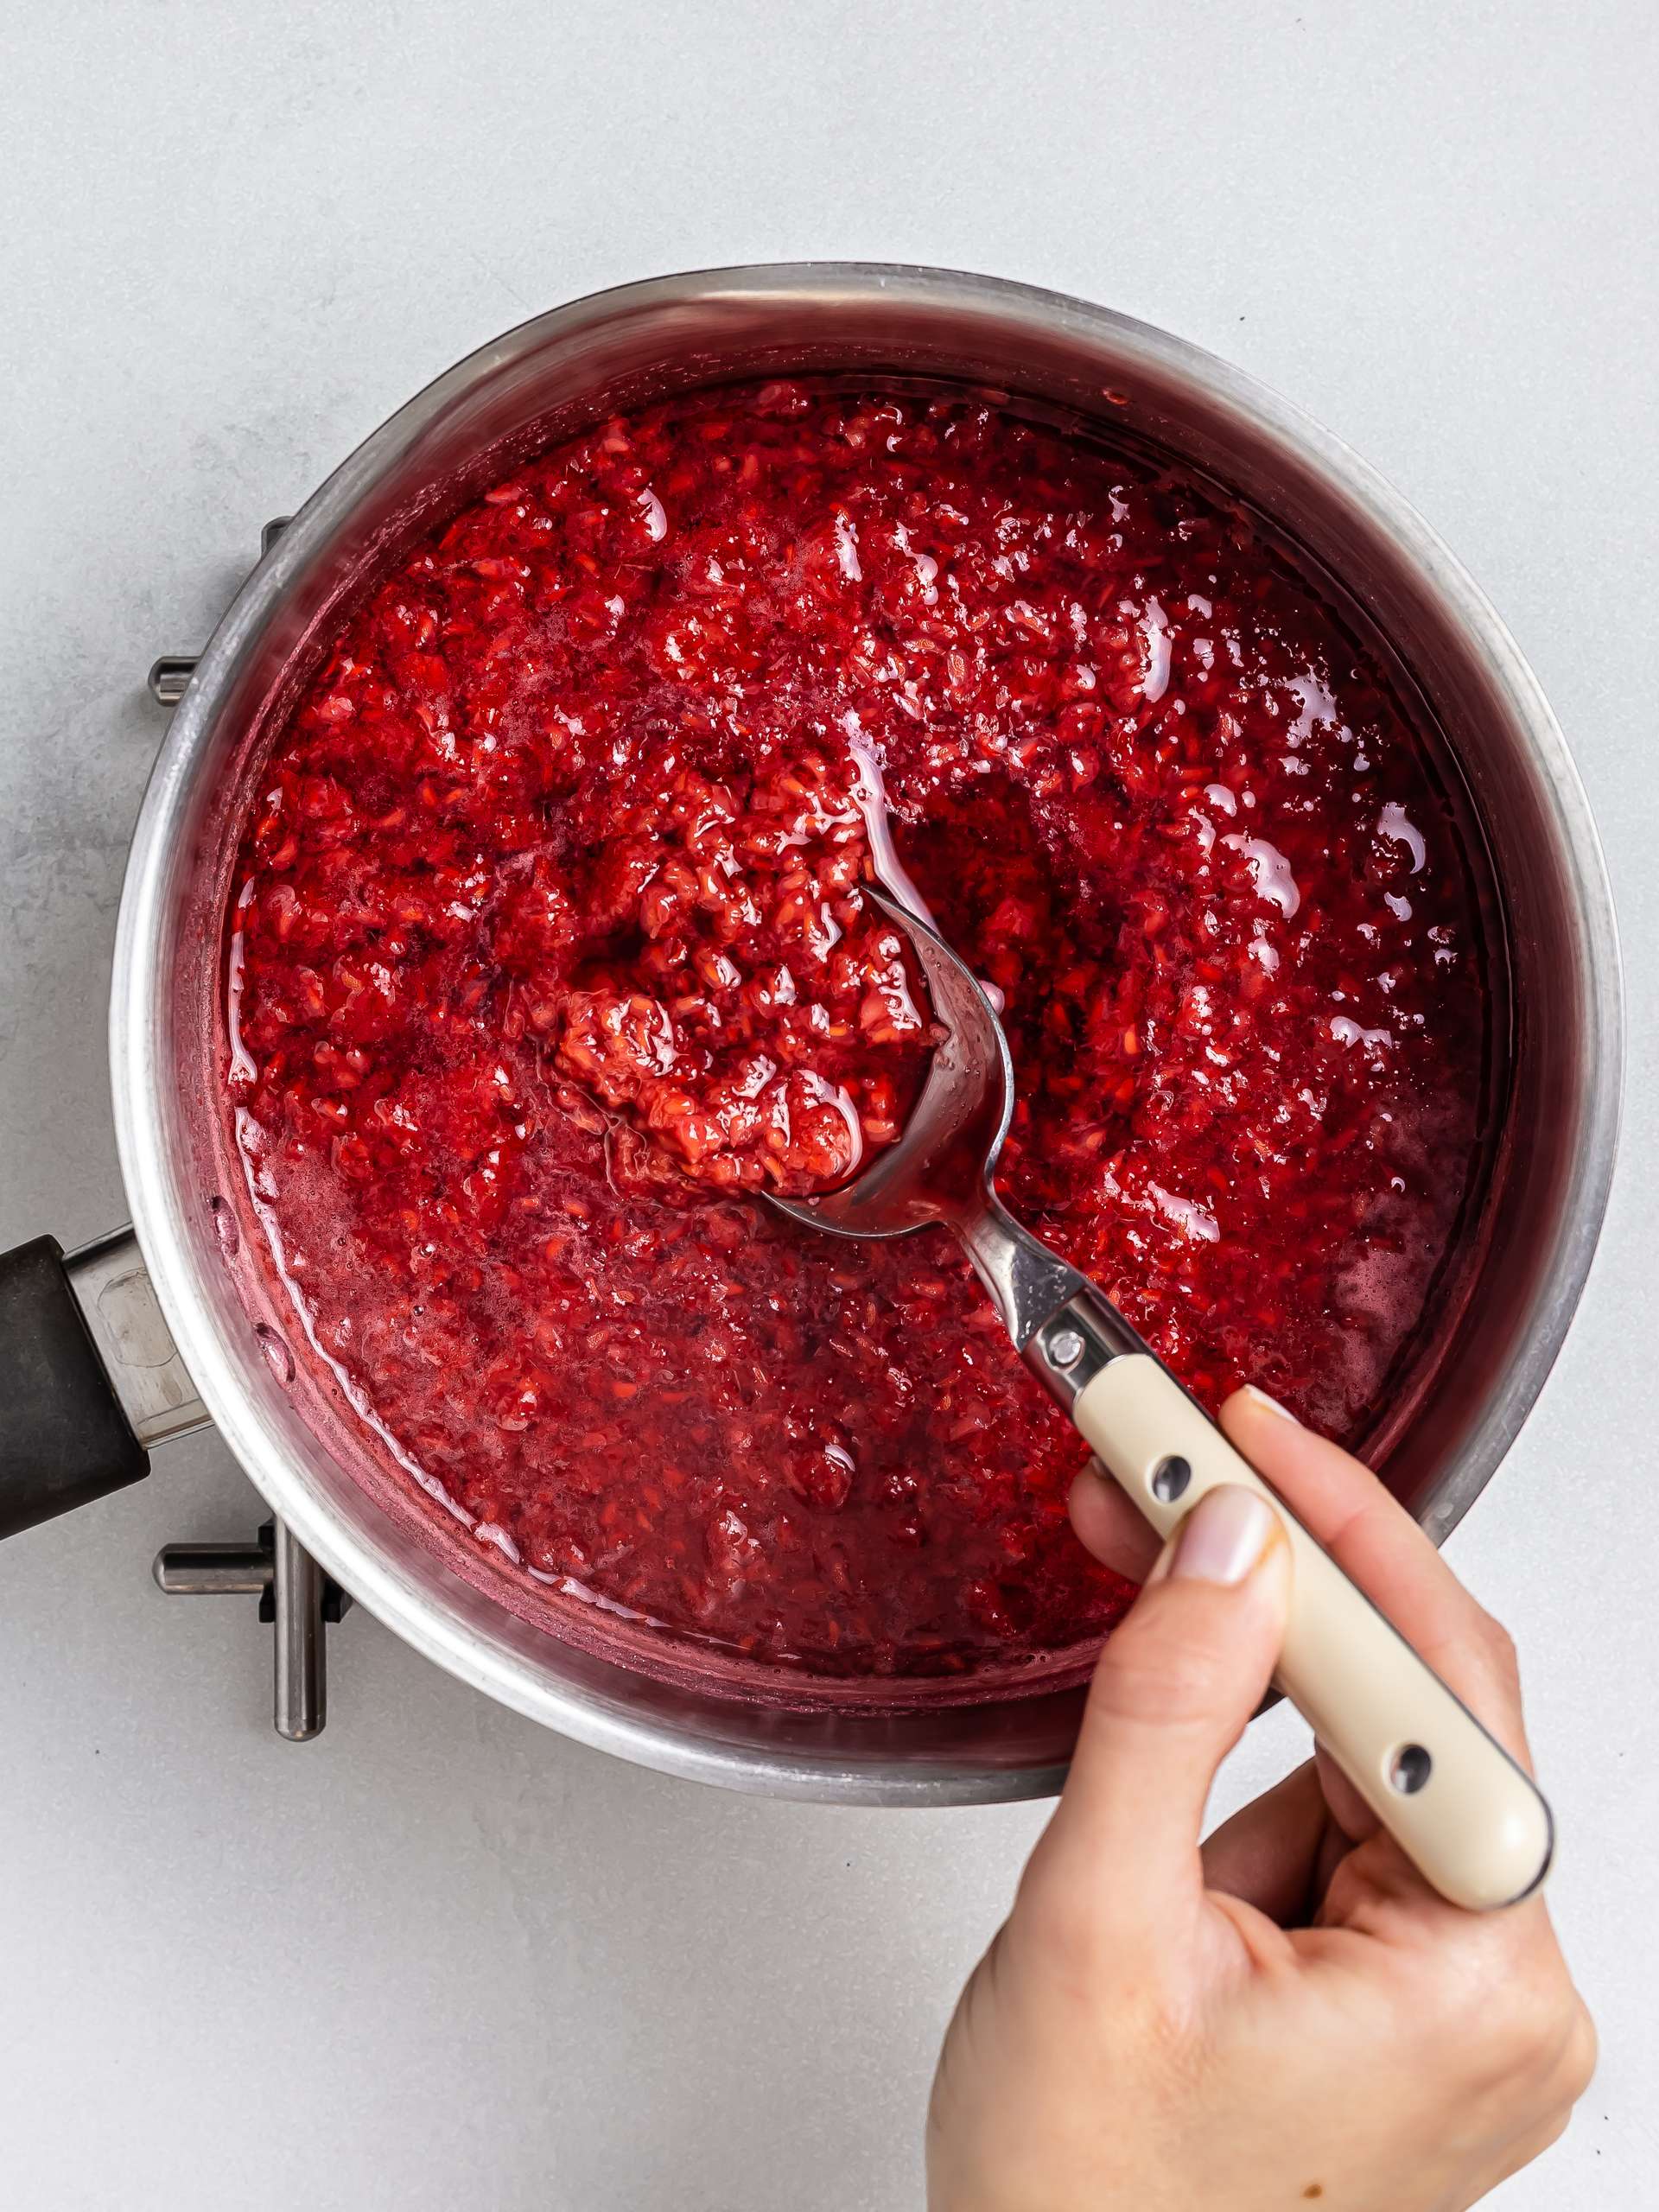 cooked raspberries in a pot